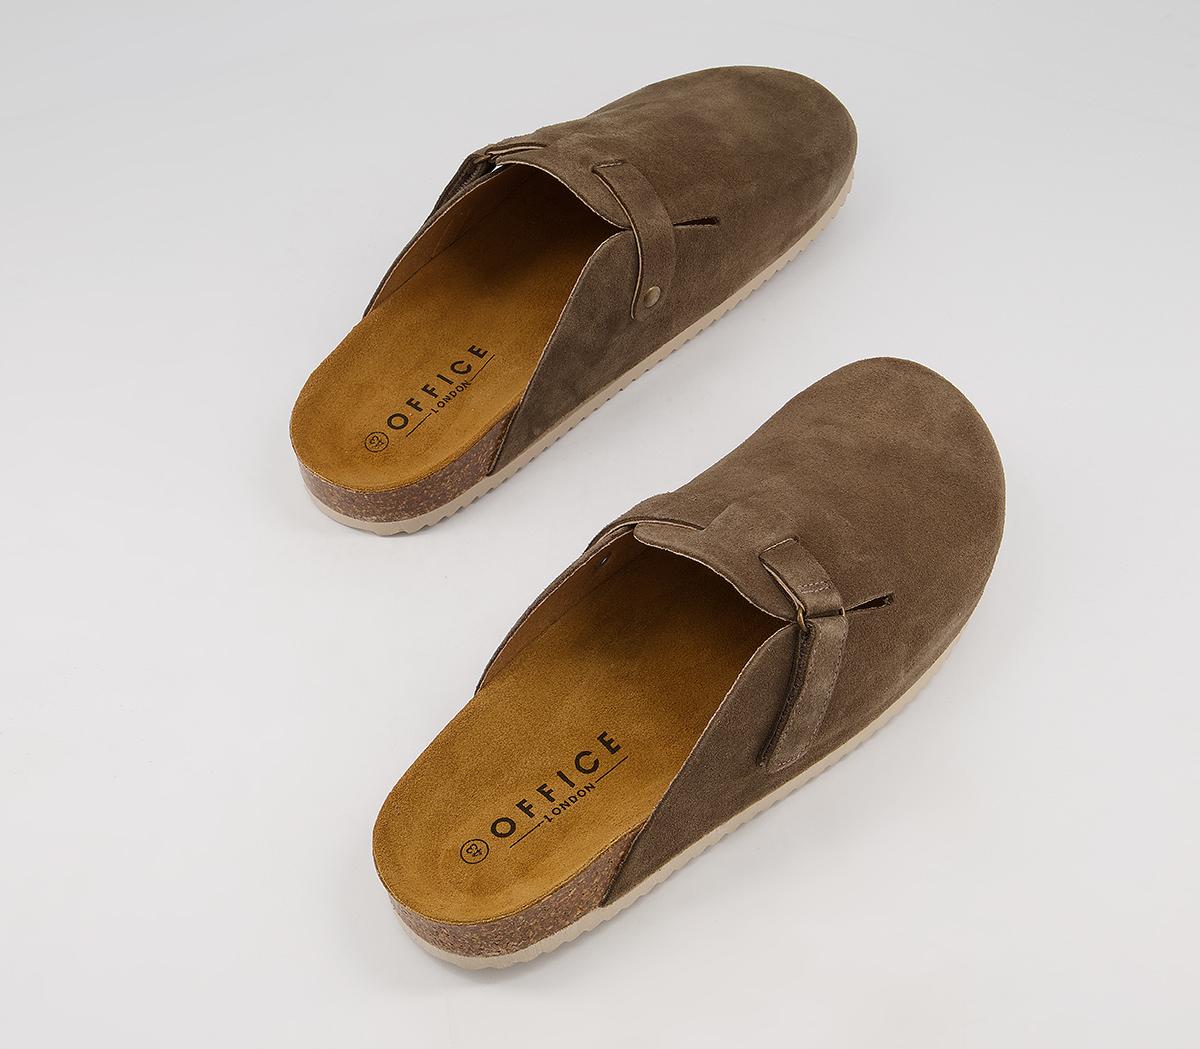 OFFICE Sully Footbed Mules Mink Suede - Men's Casual Shoes